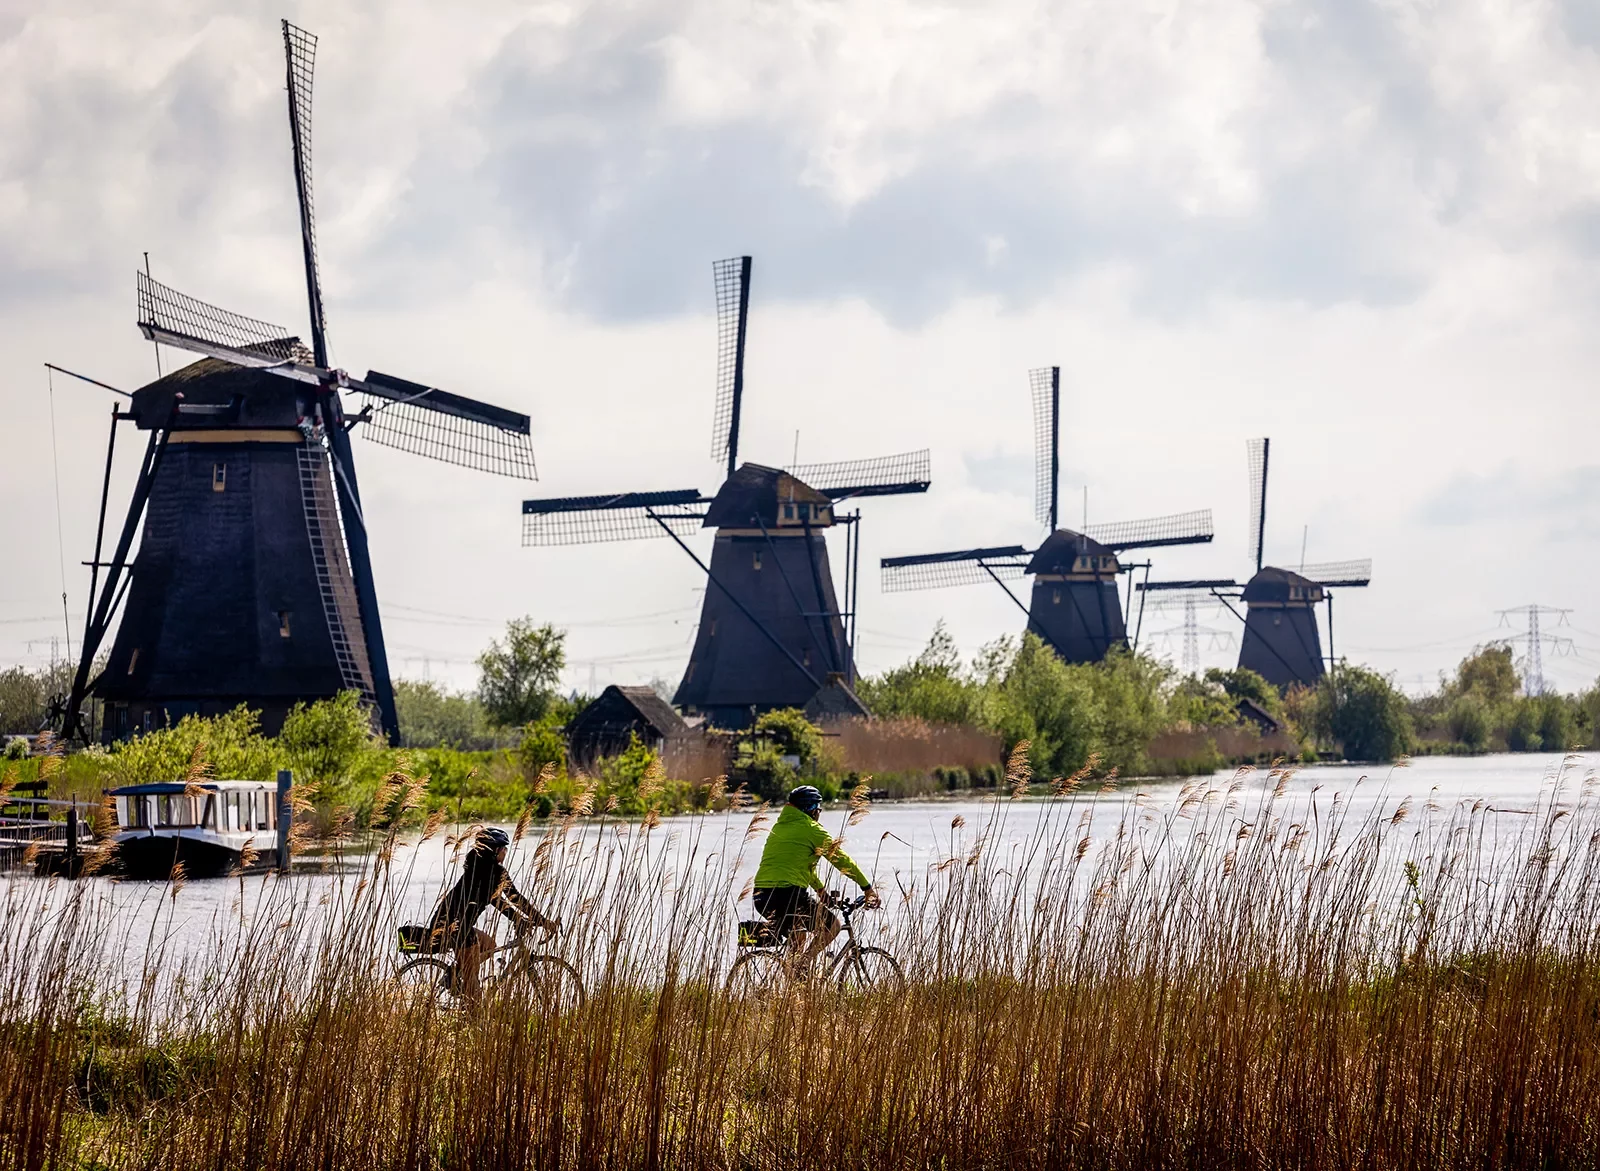 Two bikers in front of windmills